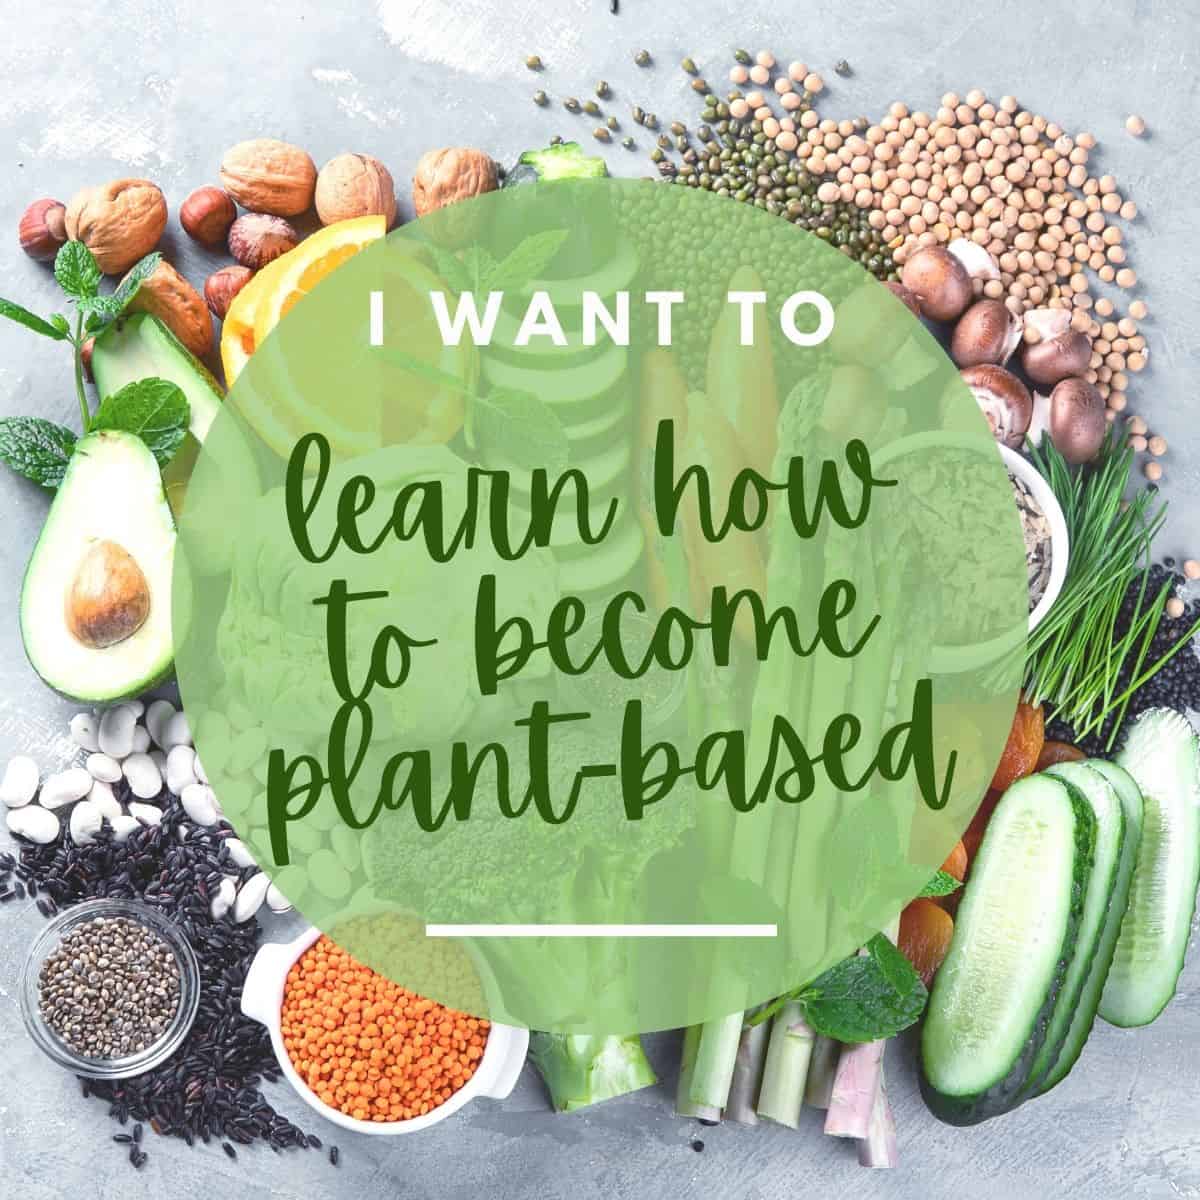 A guide to becoming plant based